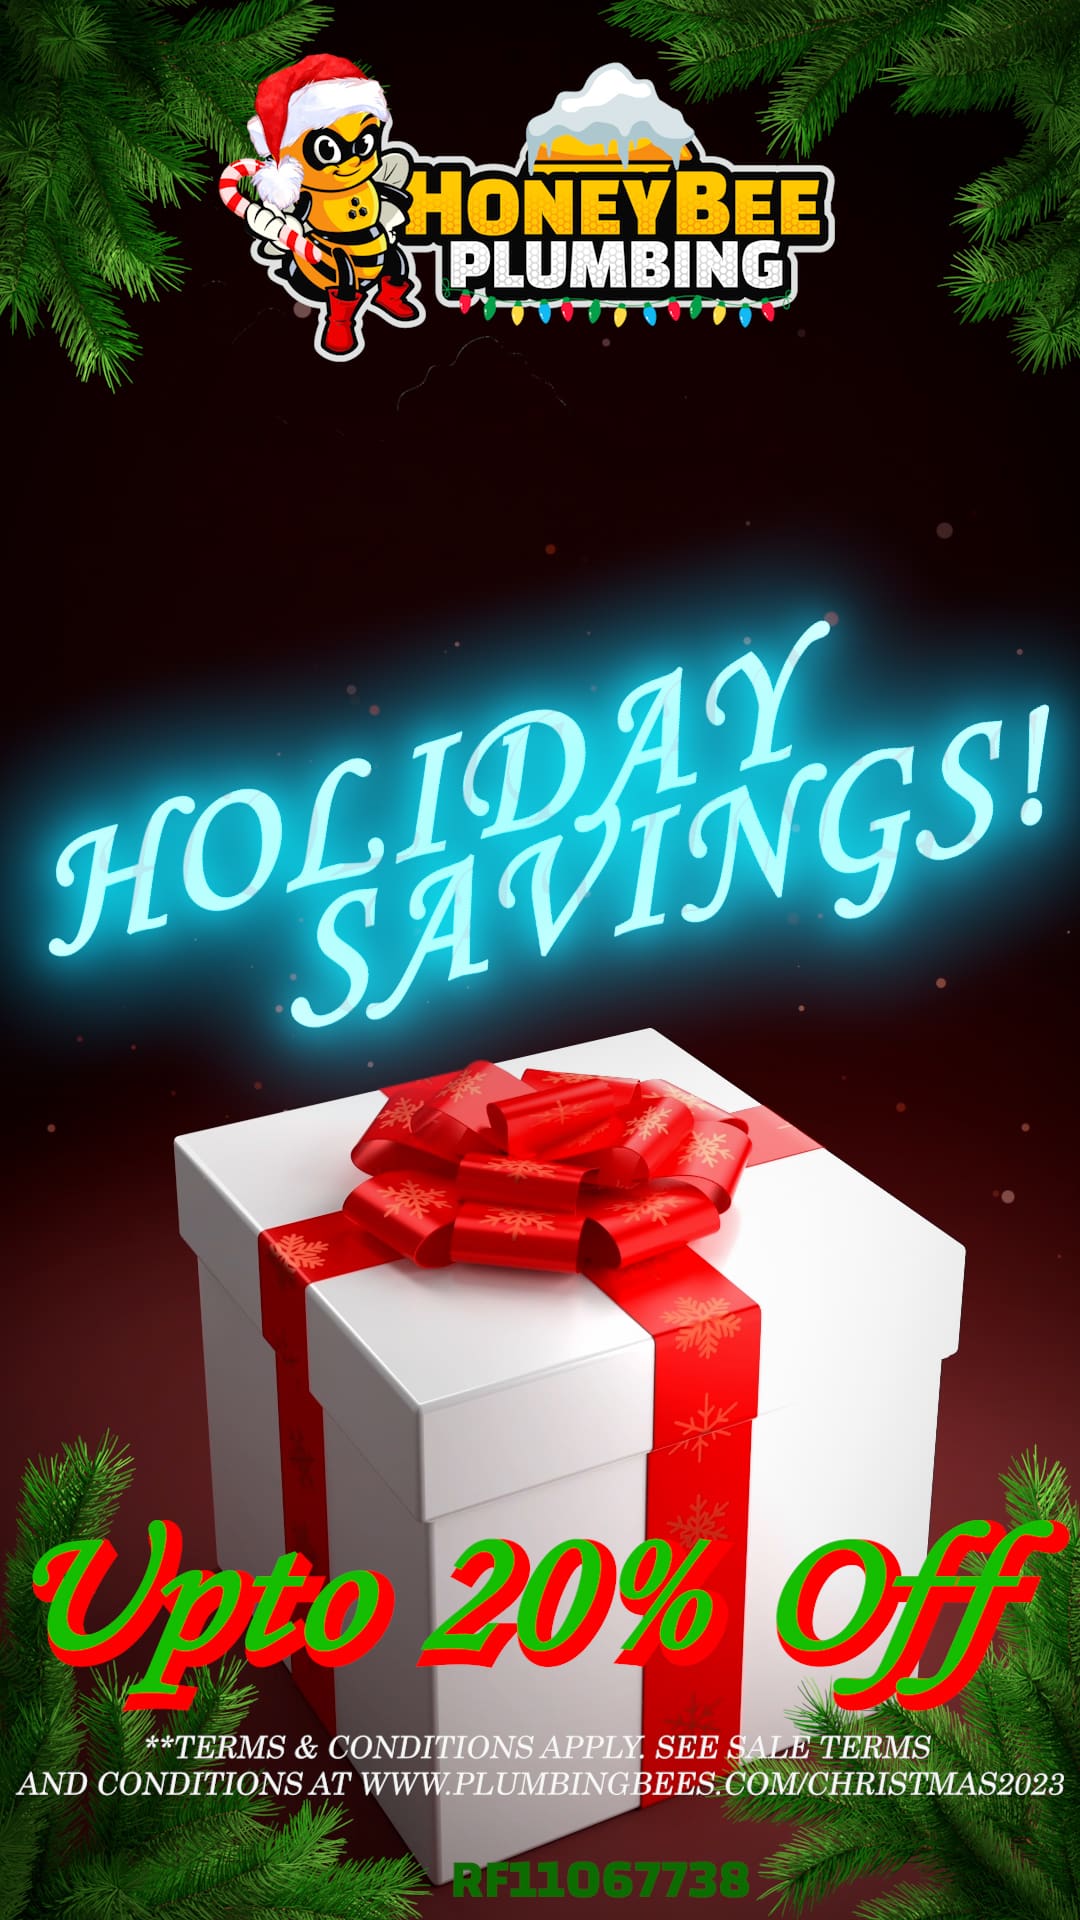 A vibrant image featuring the Honey Bee Plumbing logo, prominently displaying an up to 20% off offer for the Christmas 2023 Special. The logo is set against a festive background with holiday-themed decorations.